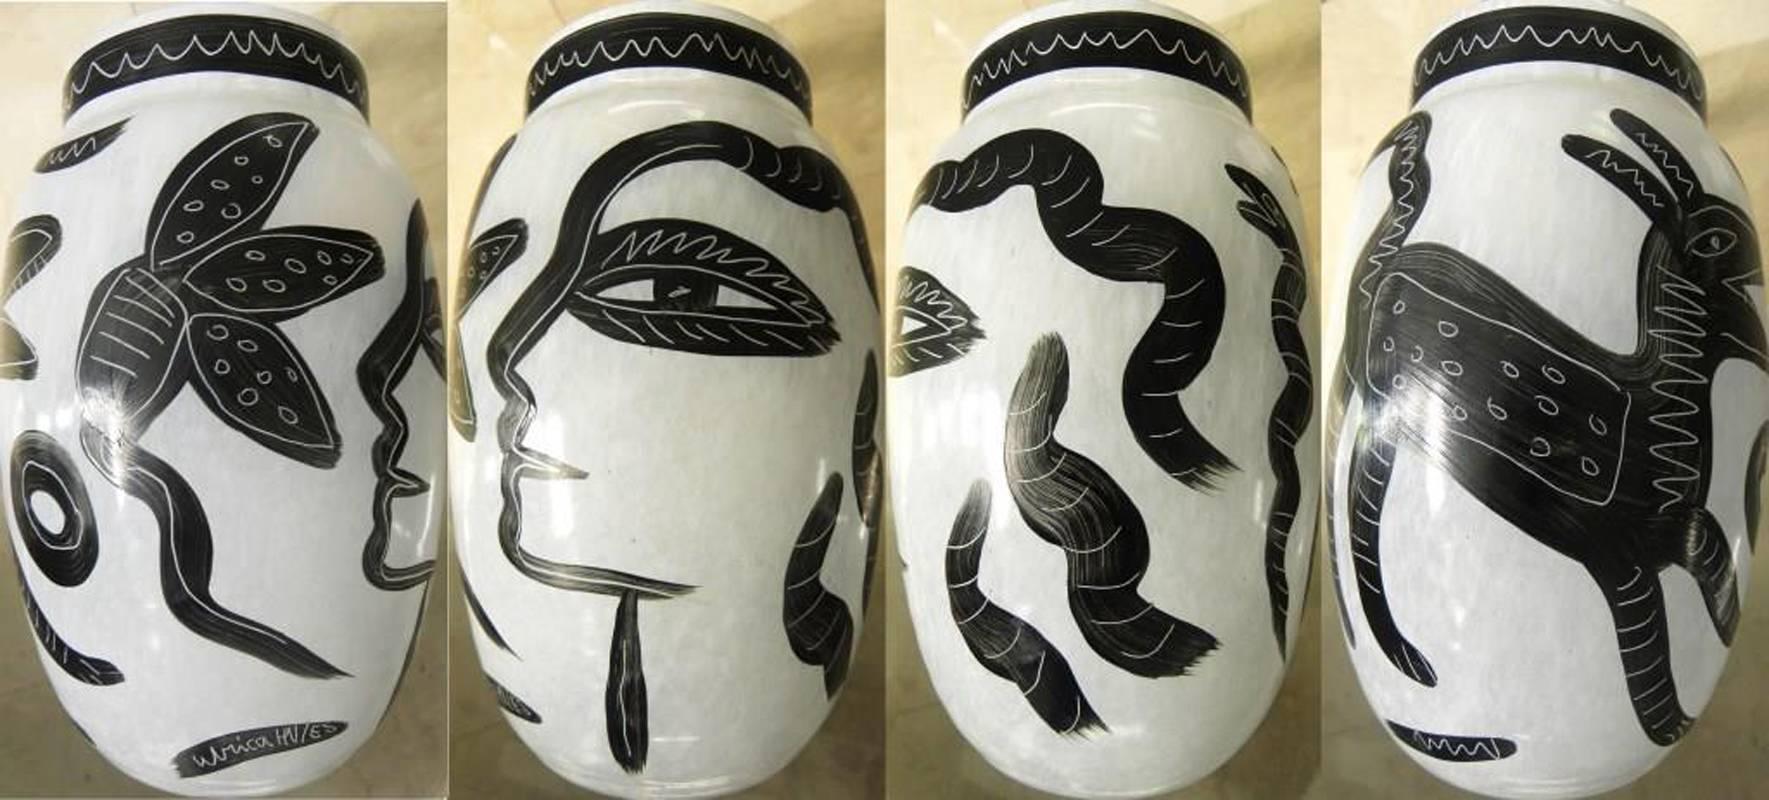 Sublime pair of white and black vases by Swedish artist Ulrica Hydman Vallien (1938).
Kosta Boda's glass manufacturer, circa 1990
Hand-painted, Signed and numbered.
 
About the artist :
Ulrica Hydman-Vallien has reached a wide public through